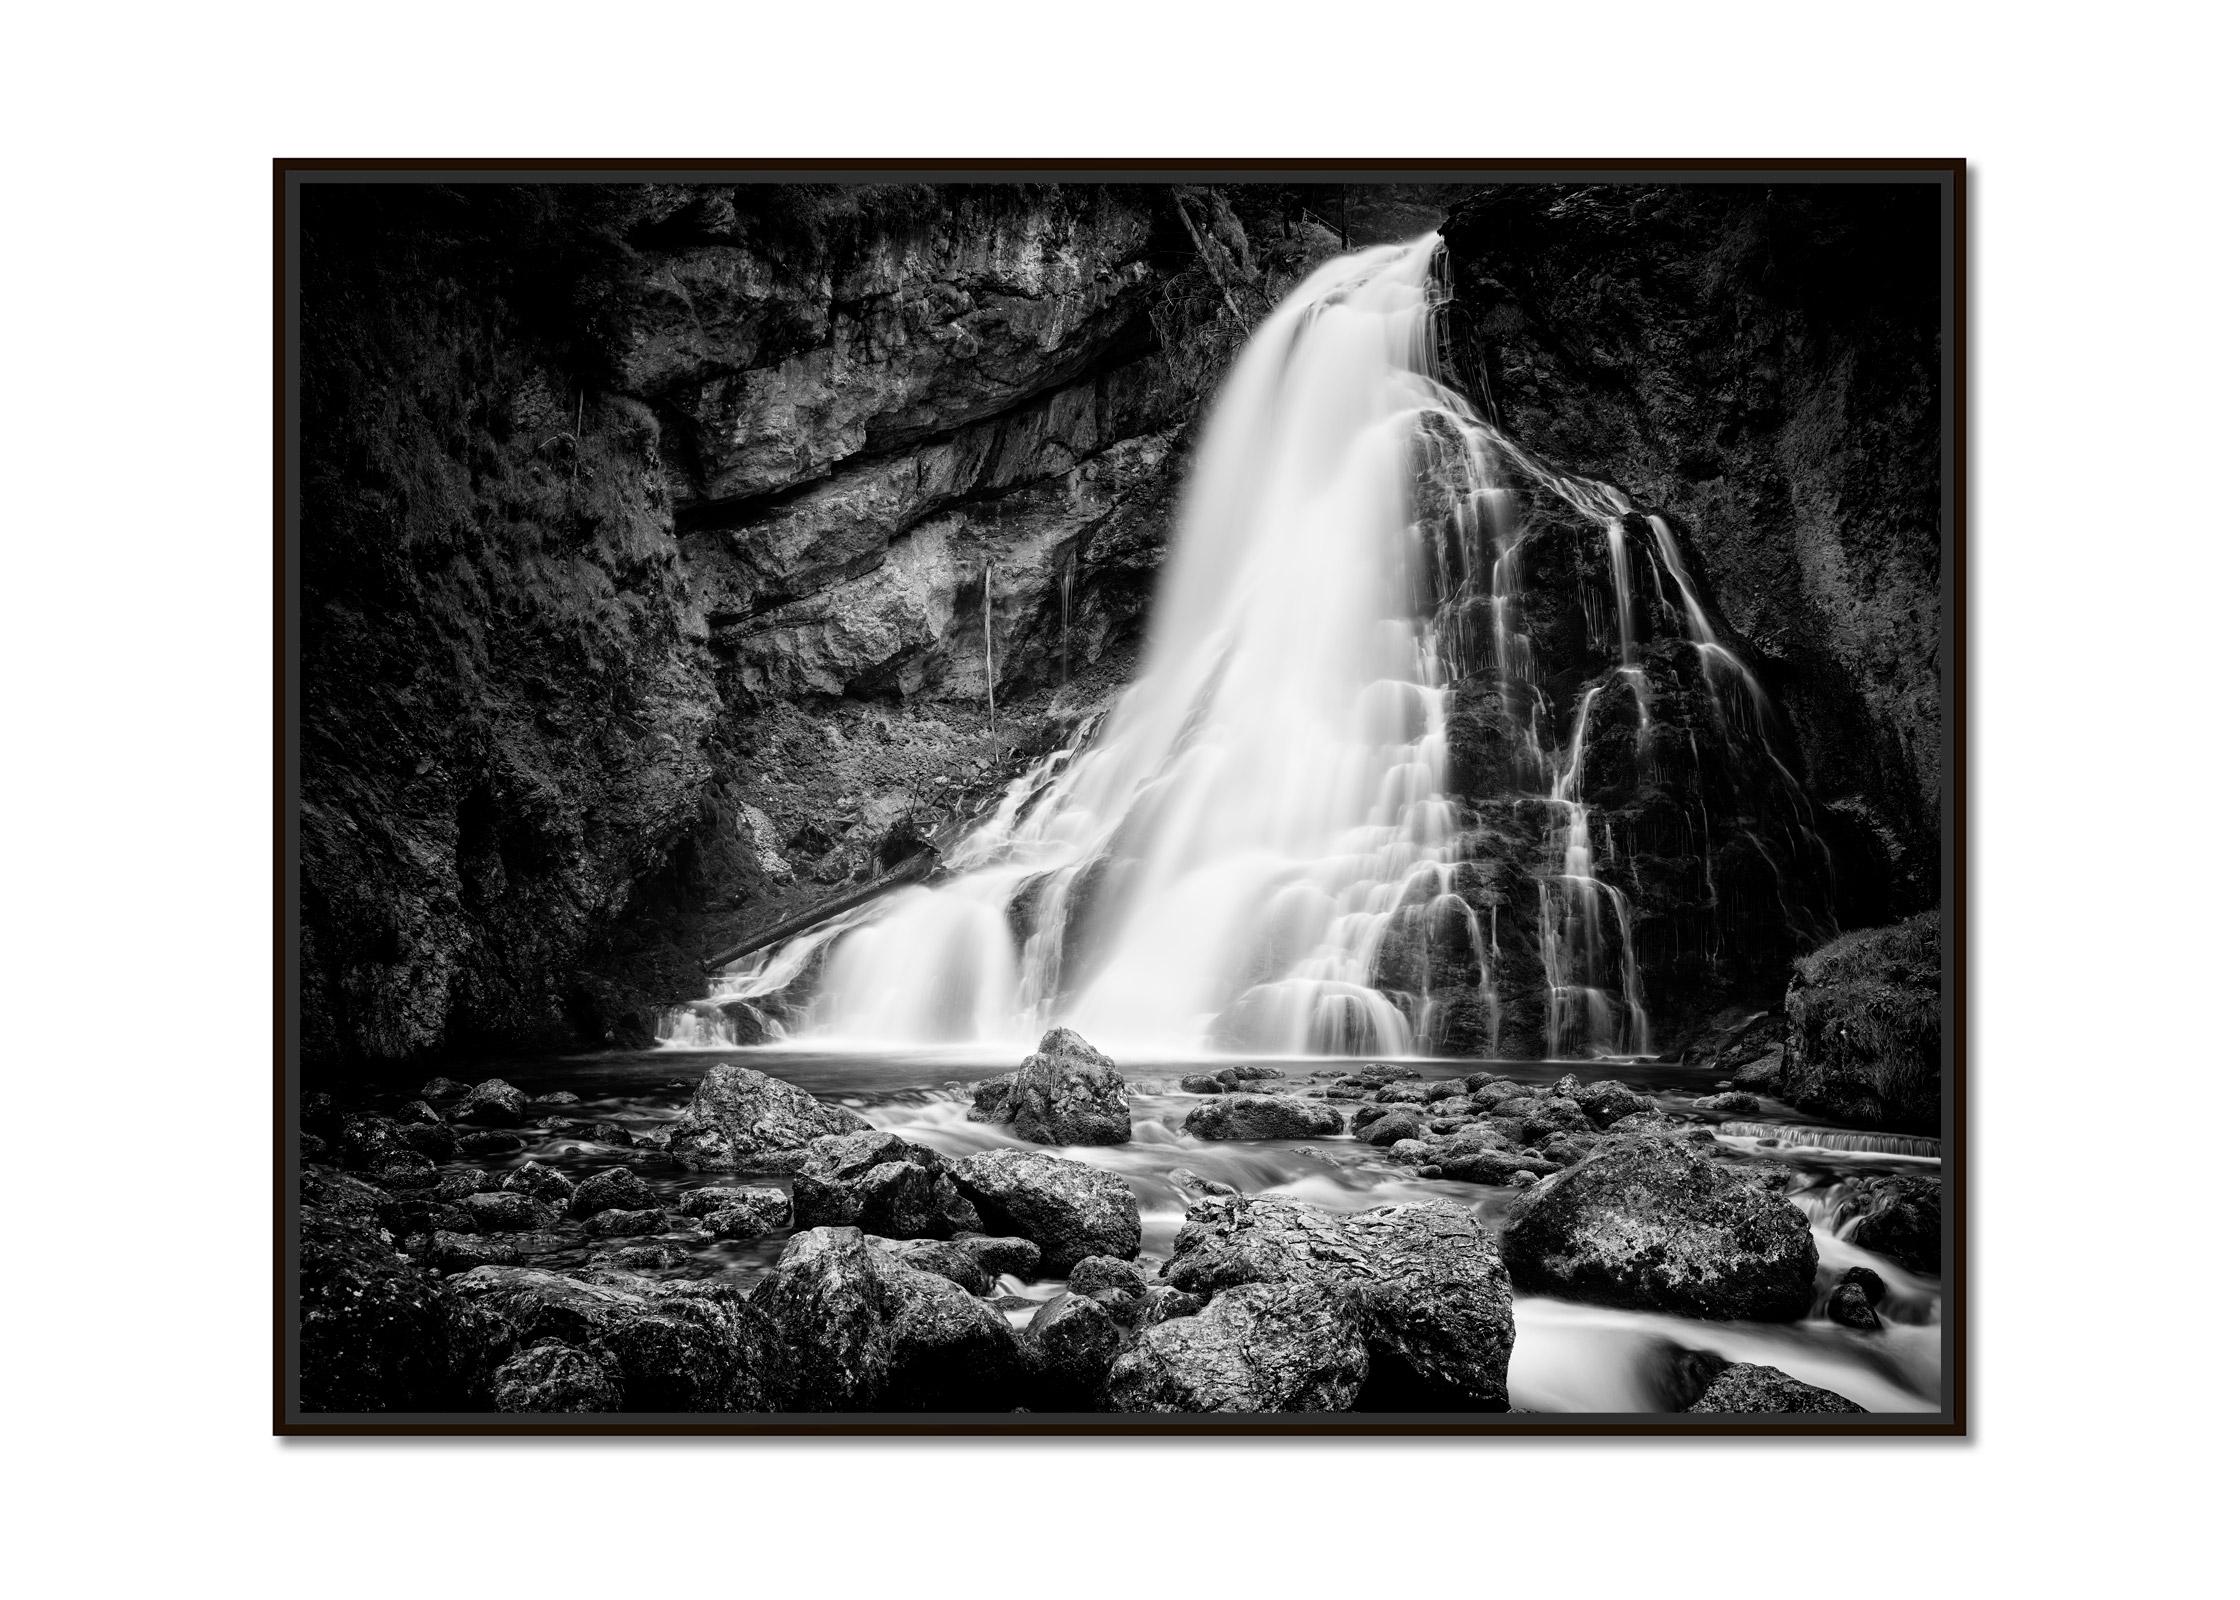 Golling Falls, mountain waterfall, black and white landscape fineart photography - Photograph by Gerald Berghammer